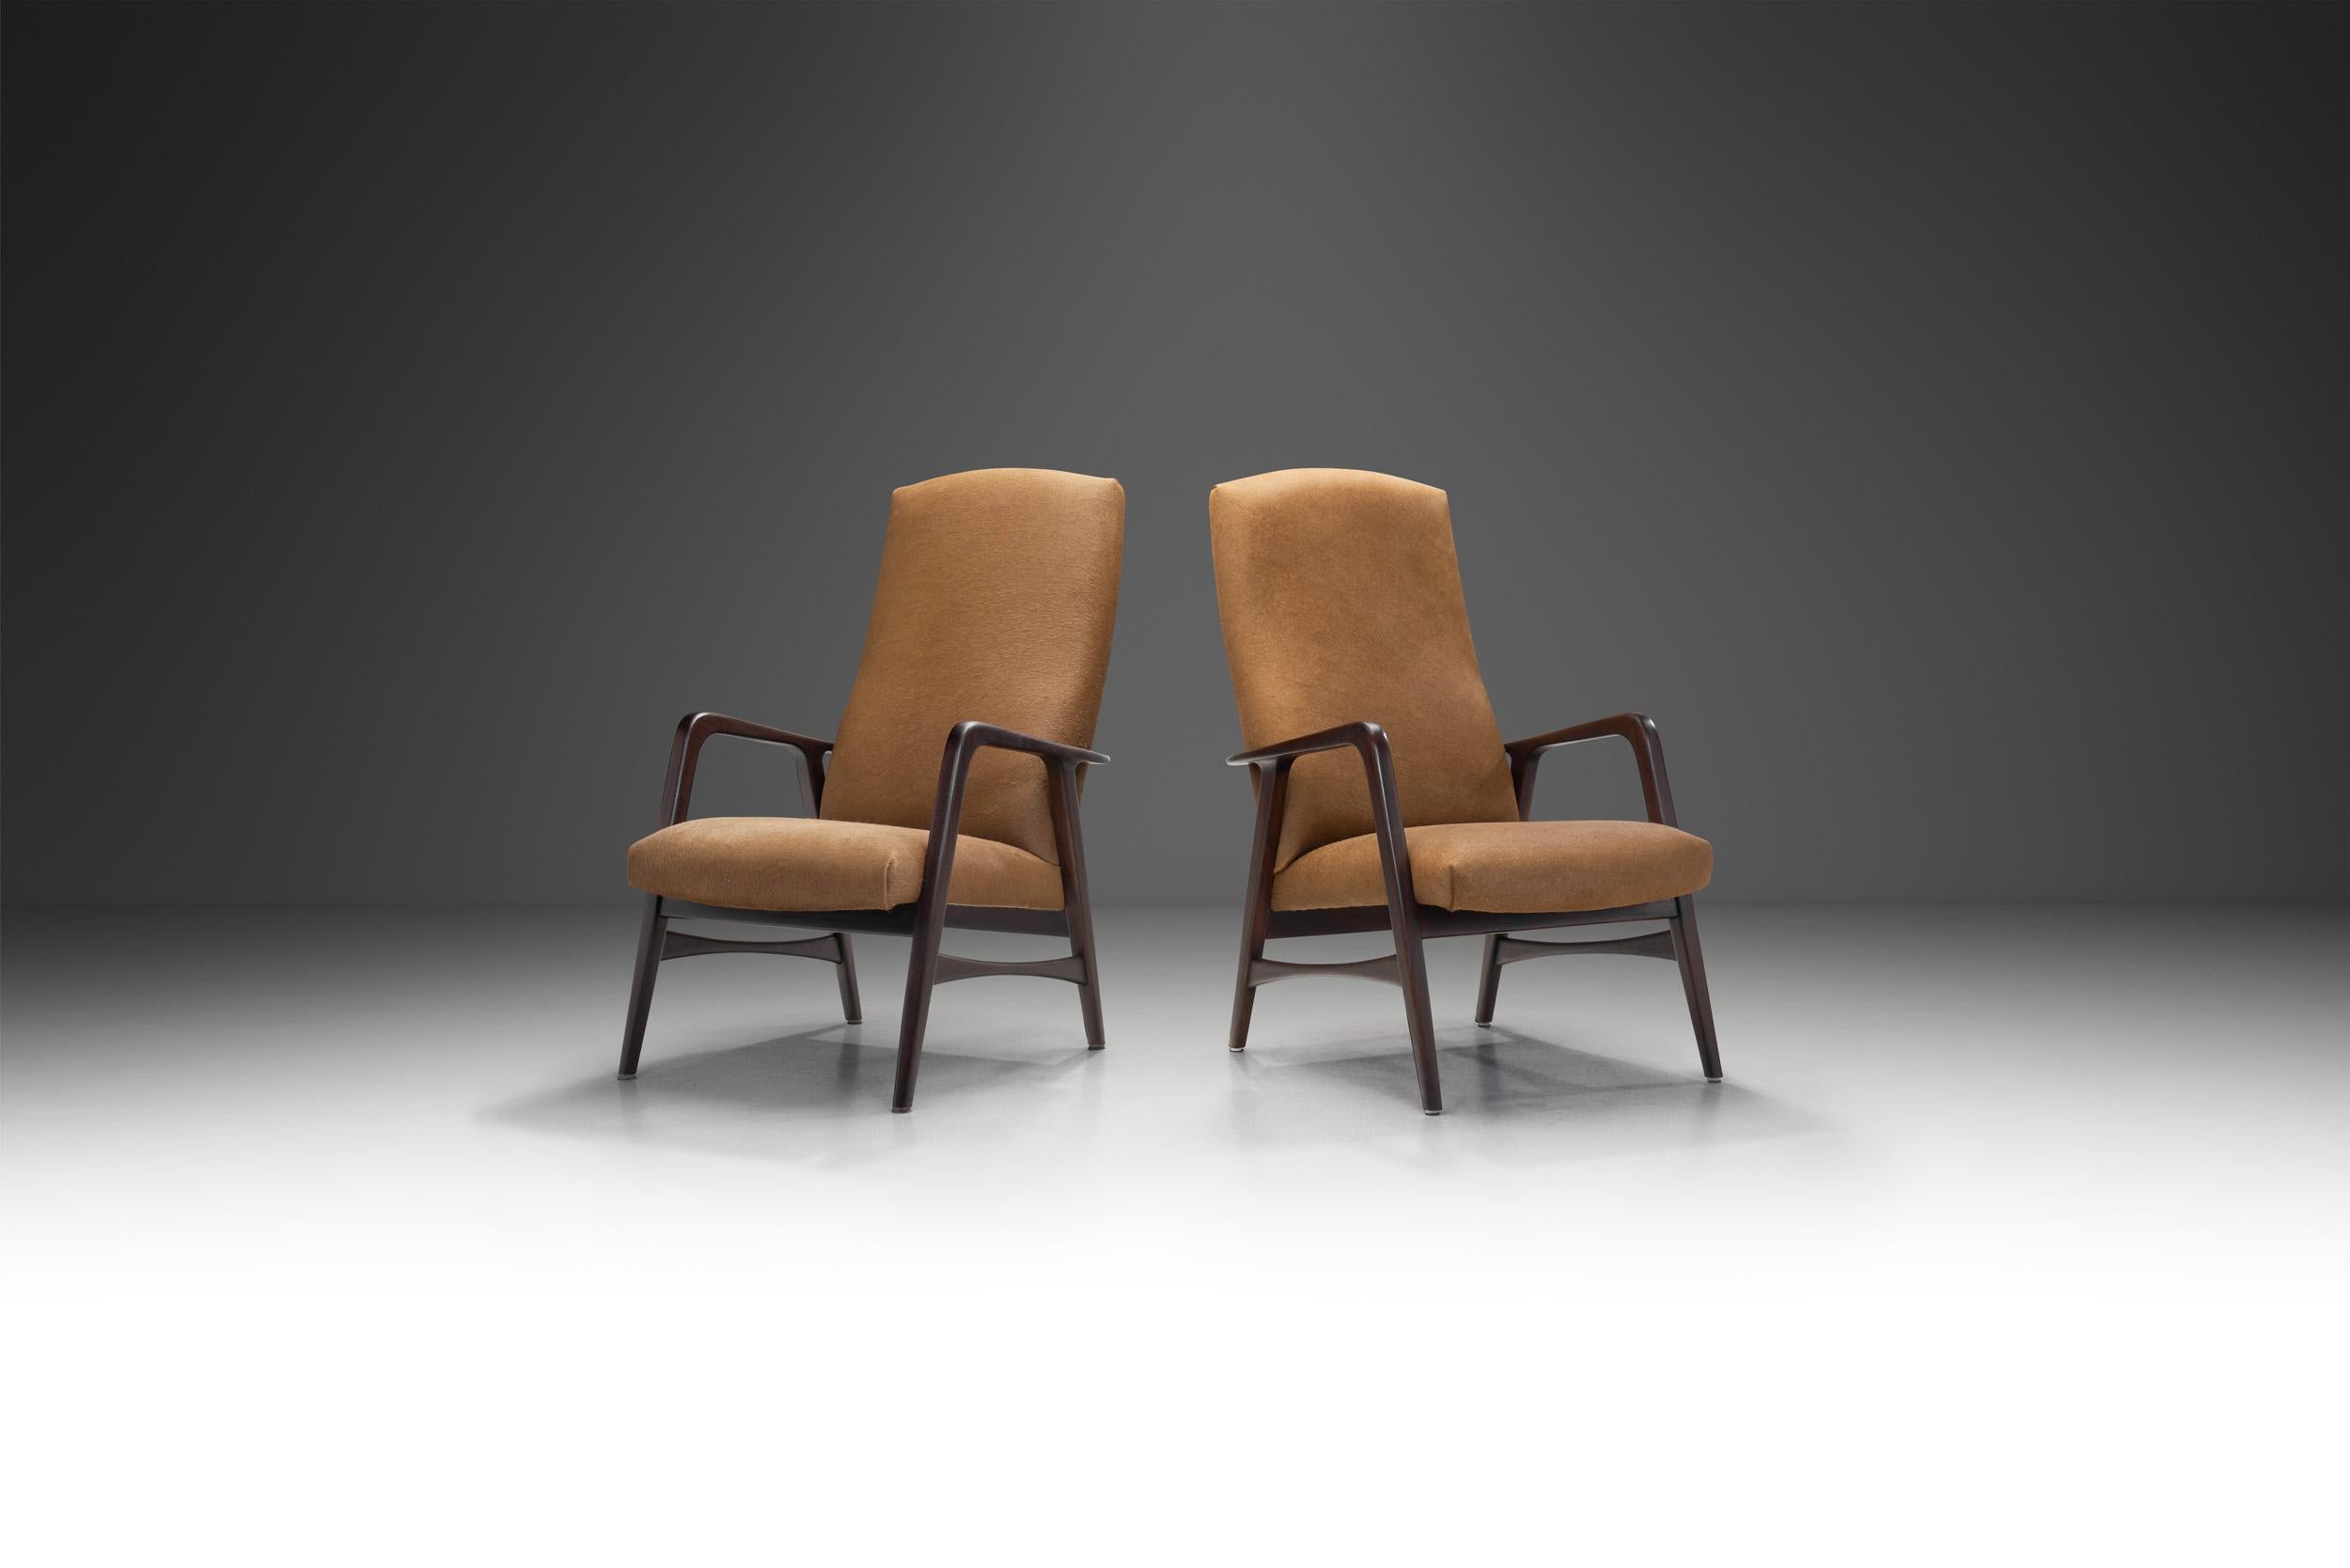 This pair of Danish cabinetmaker chairs, is a great example of the Danish mid-century modern aesthetic. With their architectural, dark stained wood frames and bodies upholstered in brown cow hide, these lounge chairs are stylish, and in possession